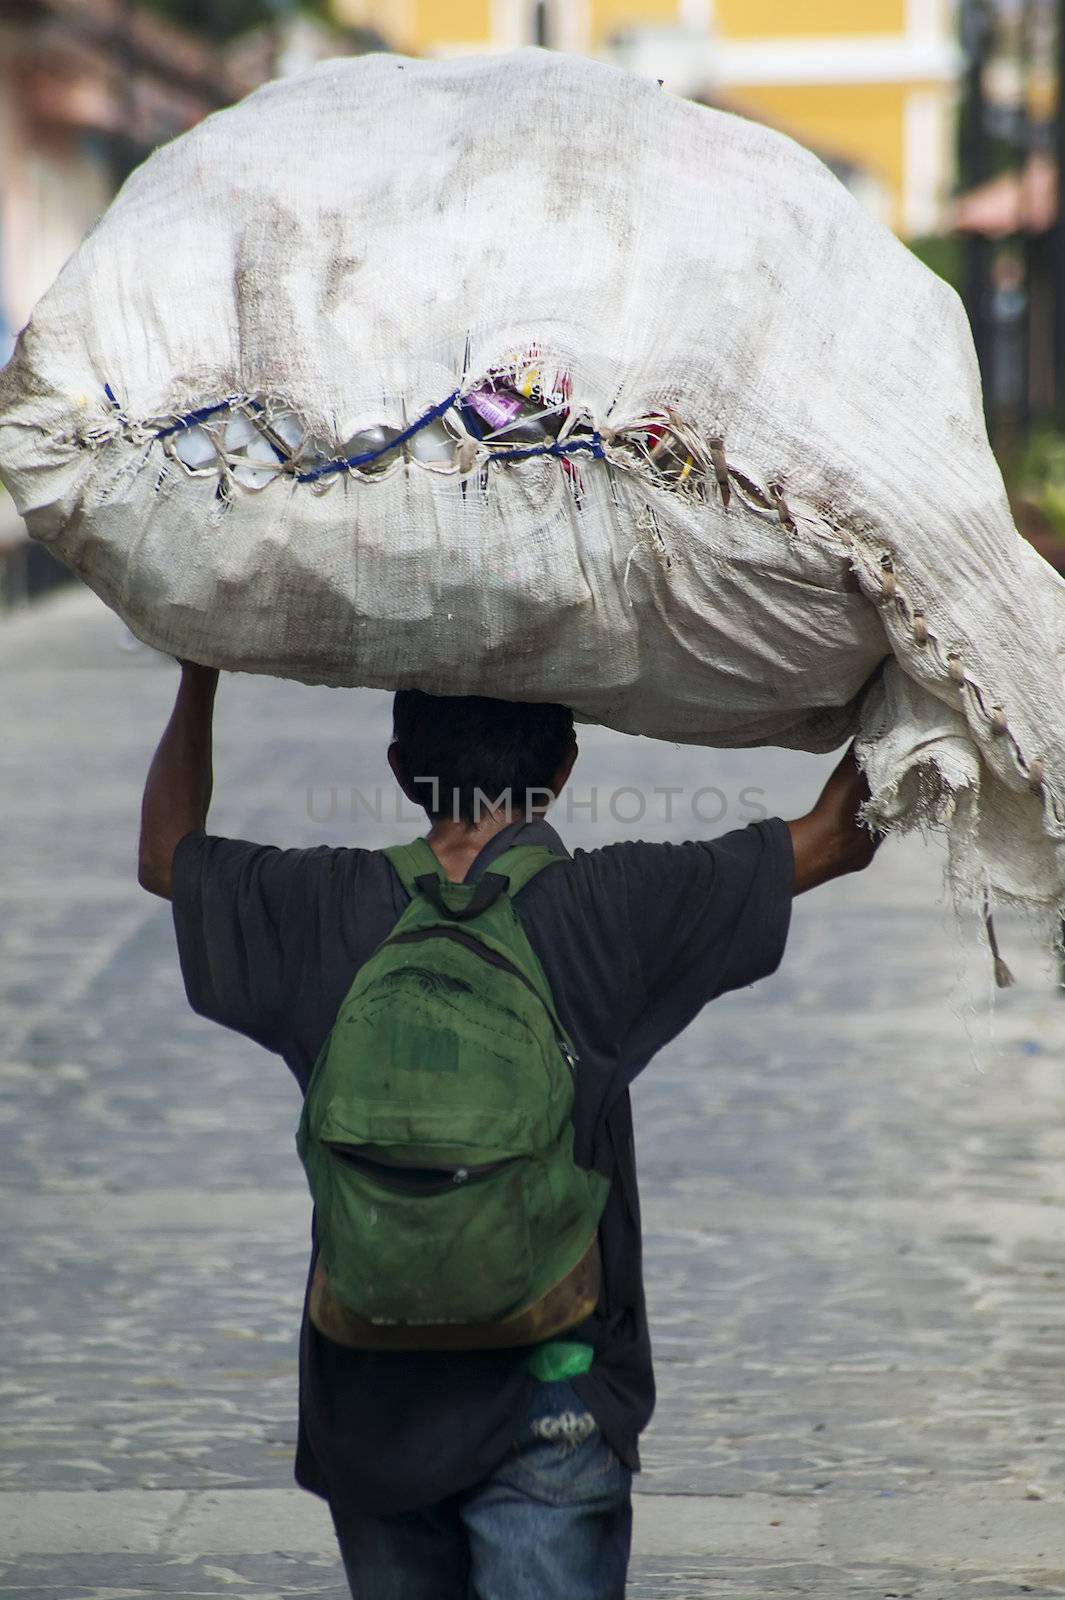 Nicaraguan man carrying a large package on his head